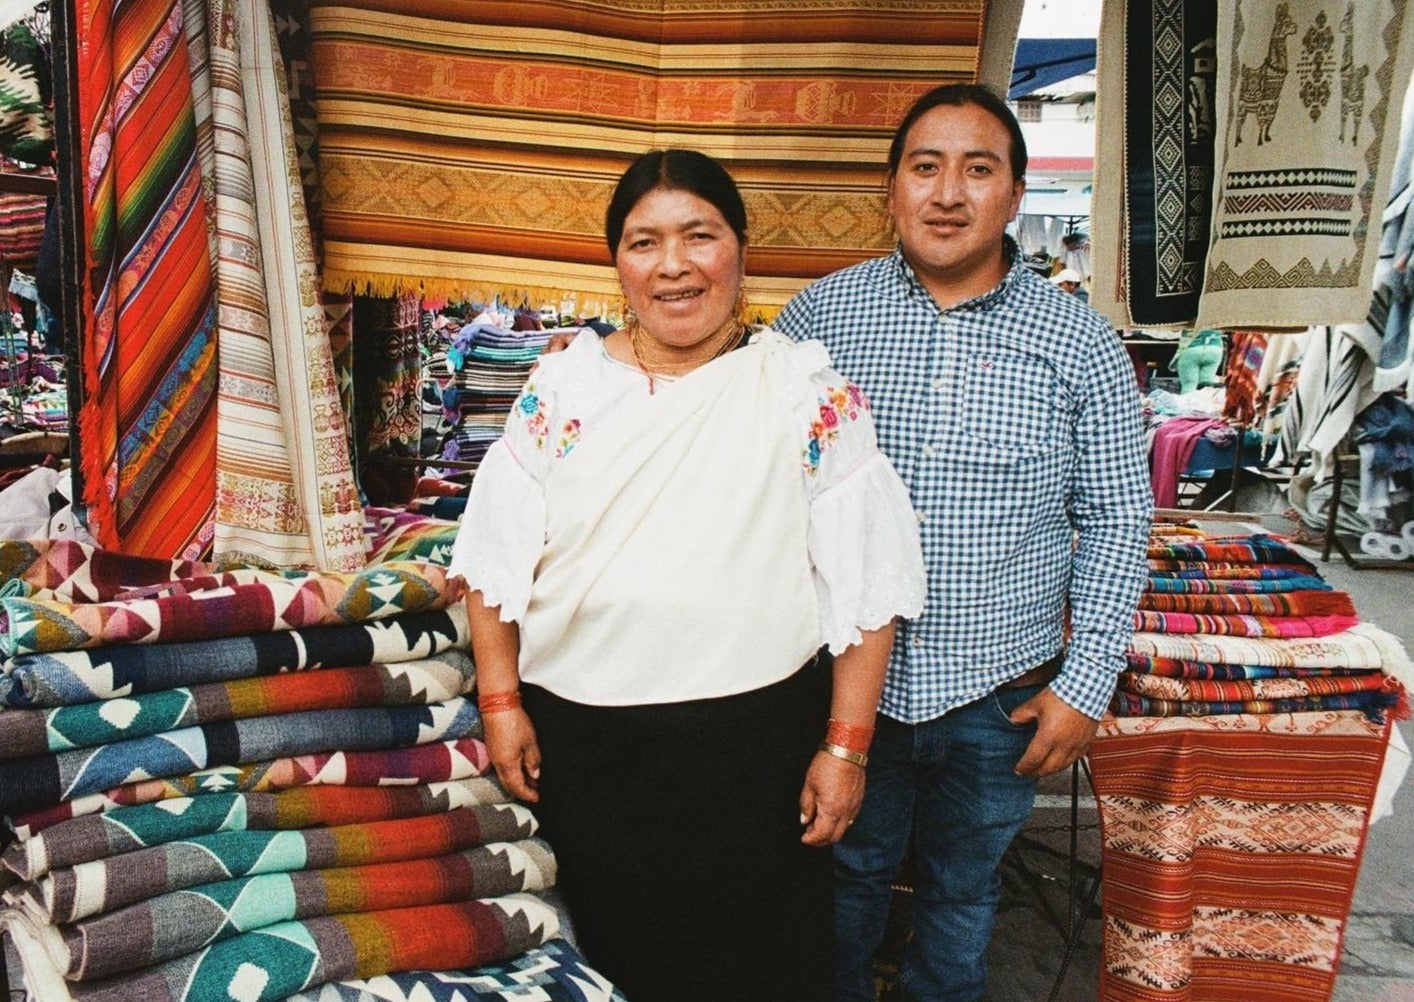 Artisans of Ecuador stand outside at a market place in Otavalo by their handmade textiles 